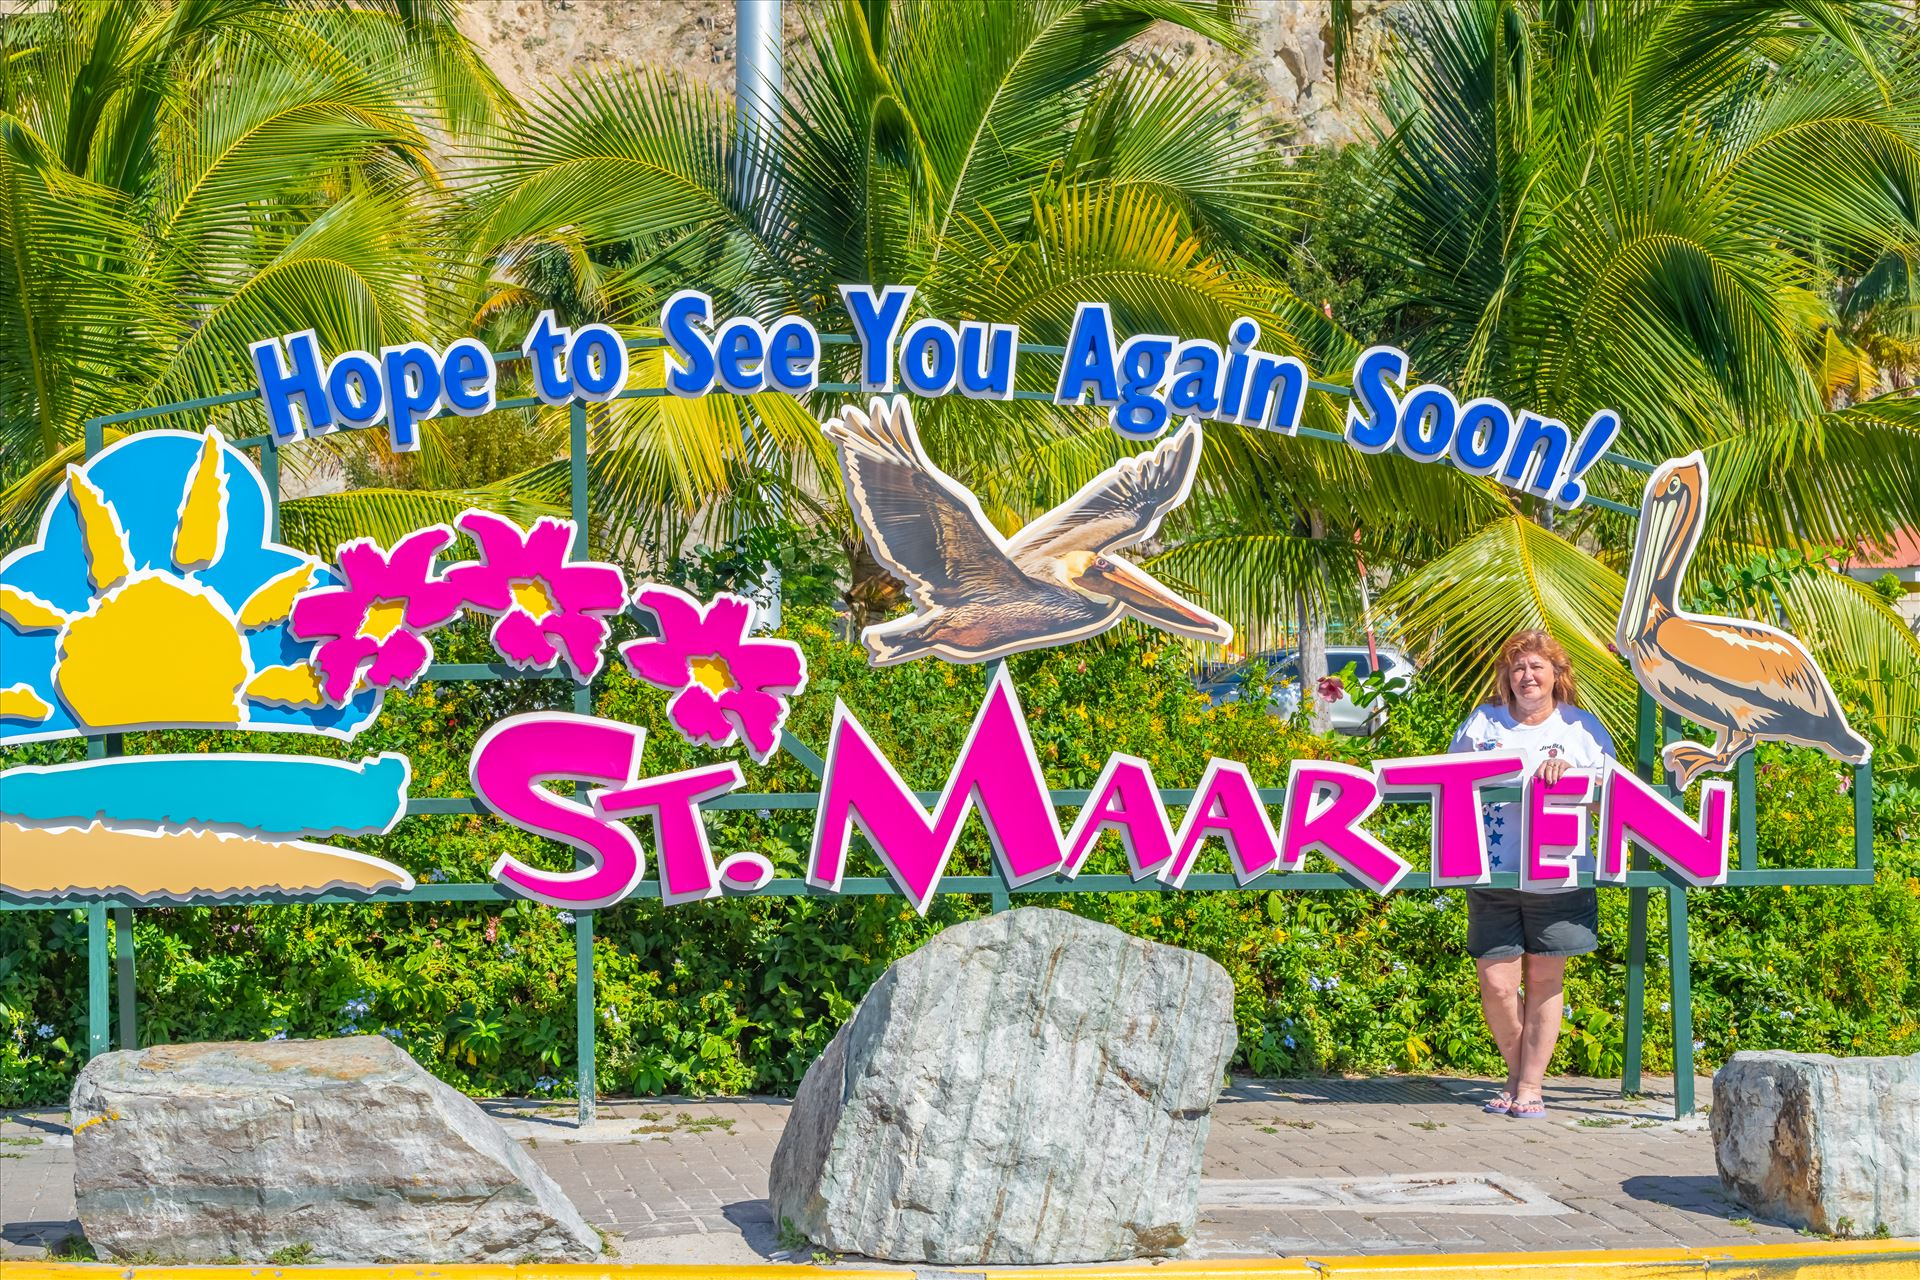 St. Maarten - Lisa at the hope to see you again soon sign by Terry Kelly Photography